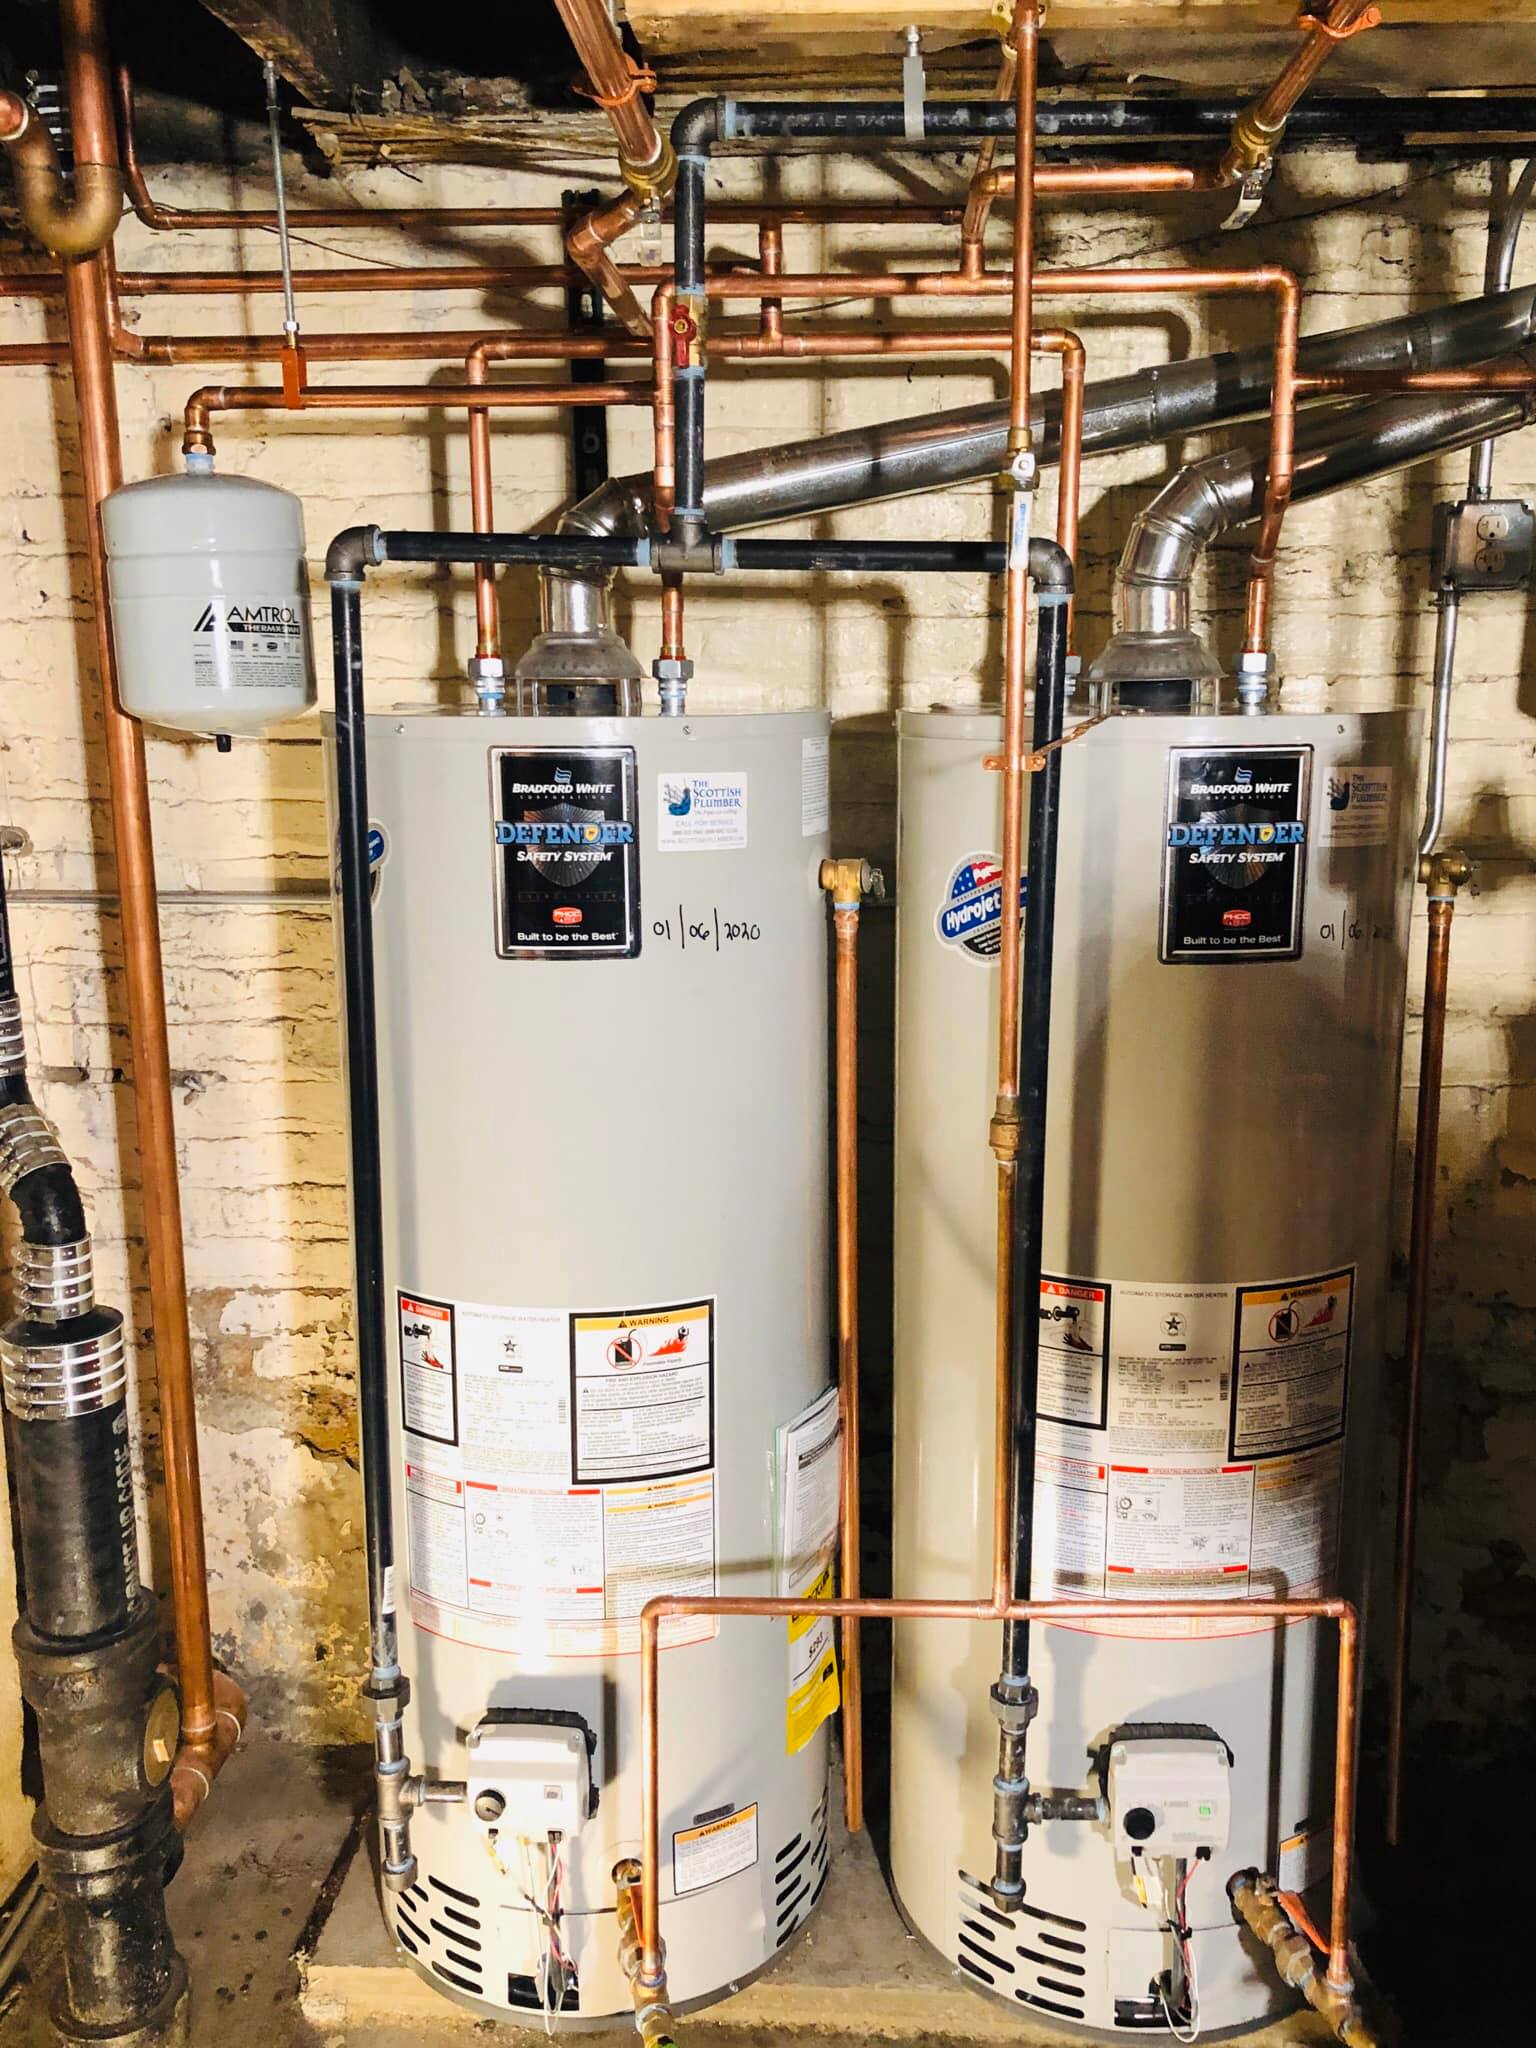 Two water heaters installed by Scottish Plumber.